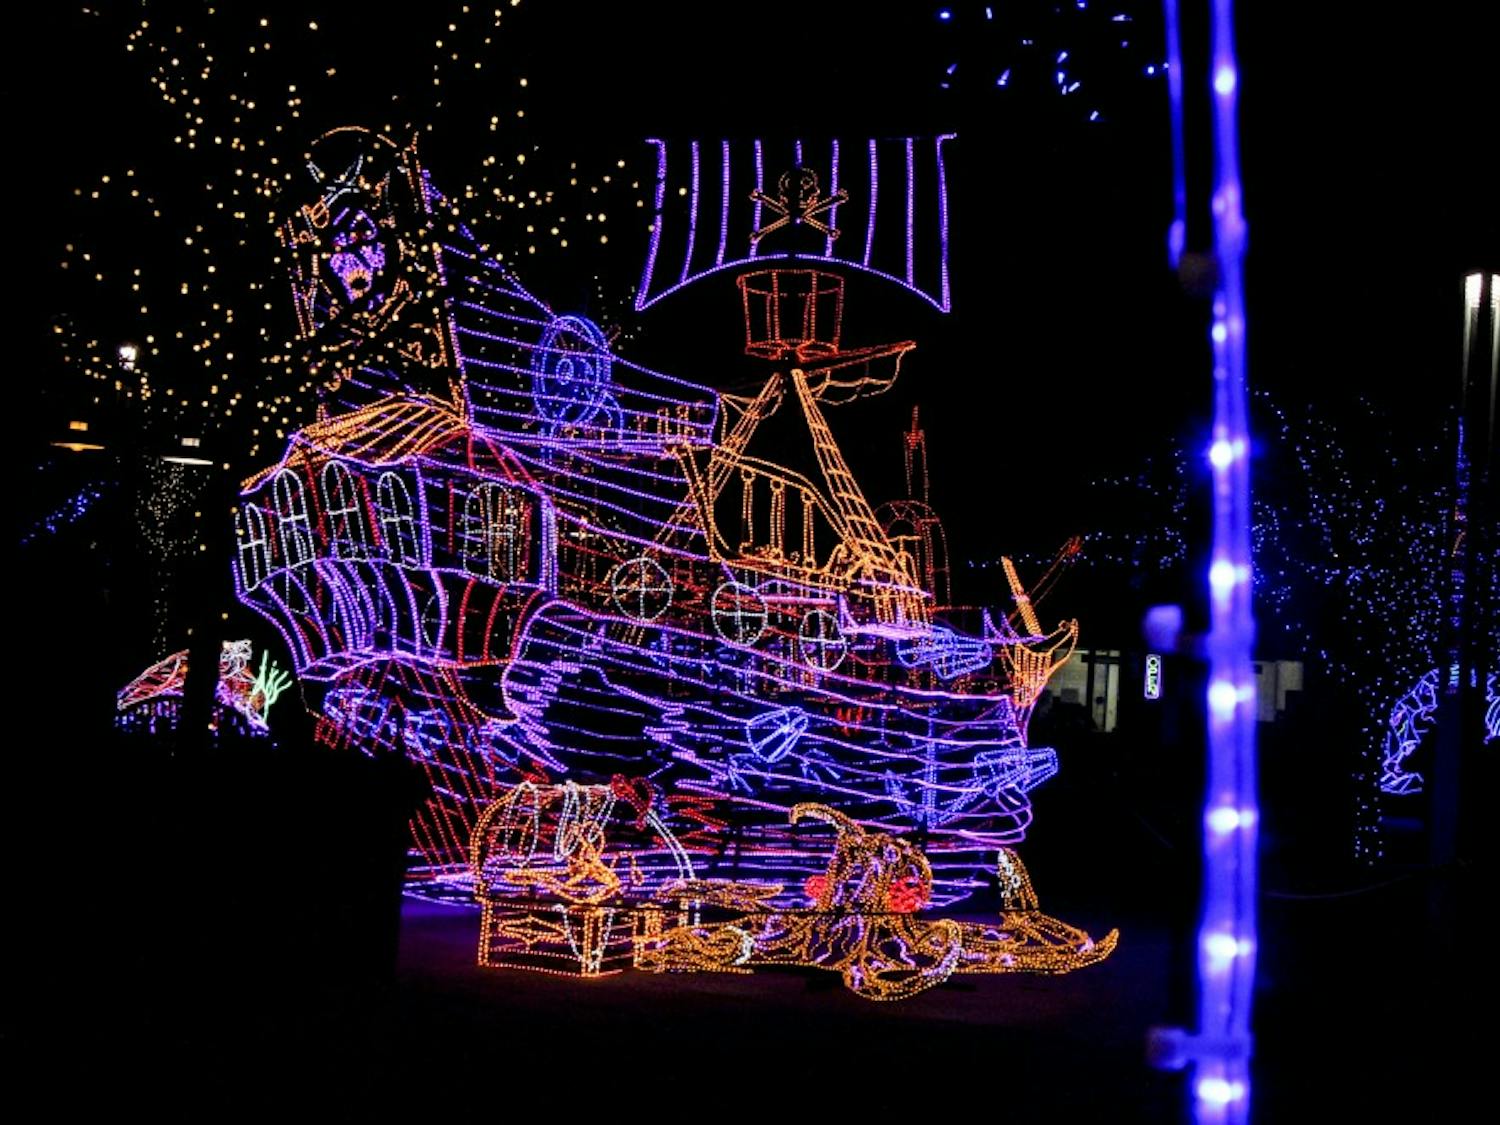 In the entrance to the River of Lights a large pirate ship with a treasure chest and octopus welcome guests attending the&nbsp;popular Albuquerque event.&nbsp;